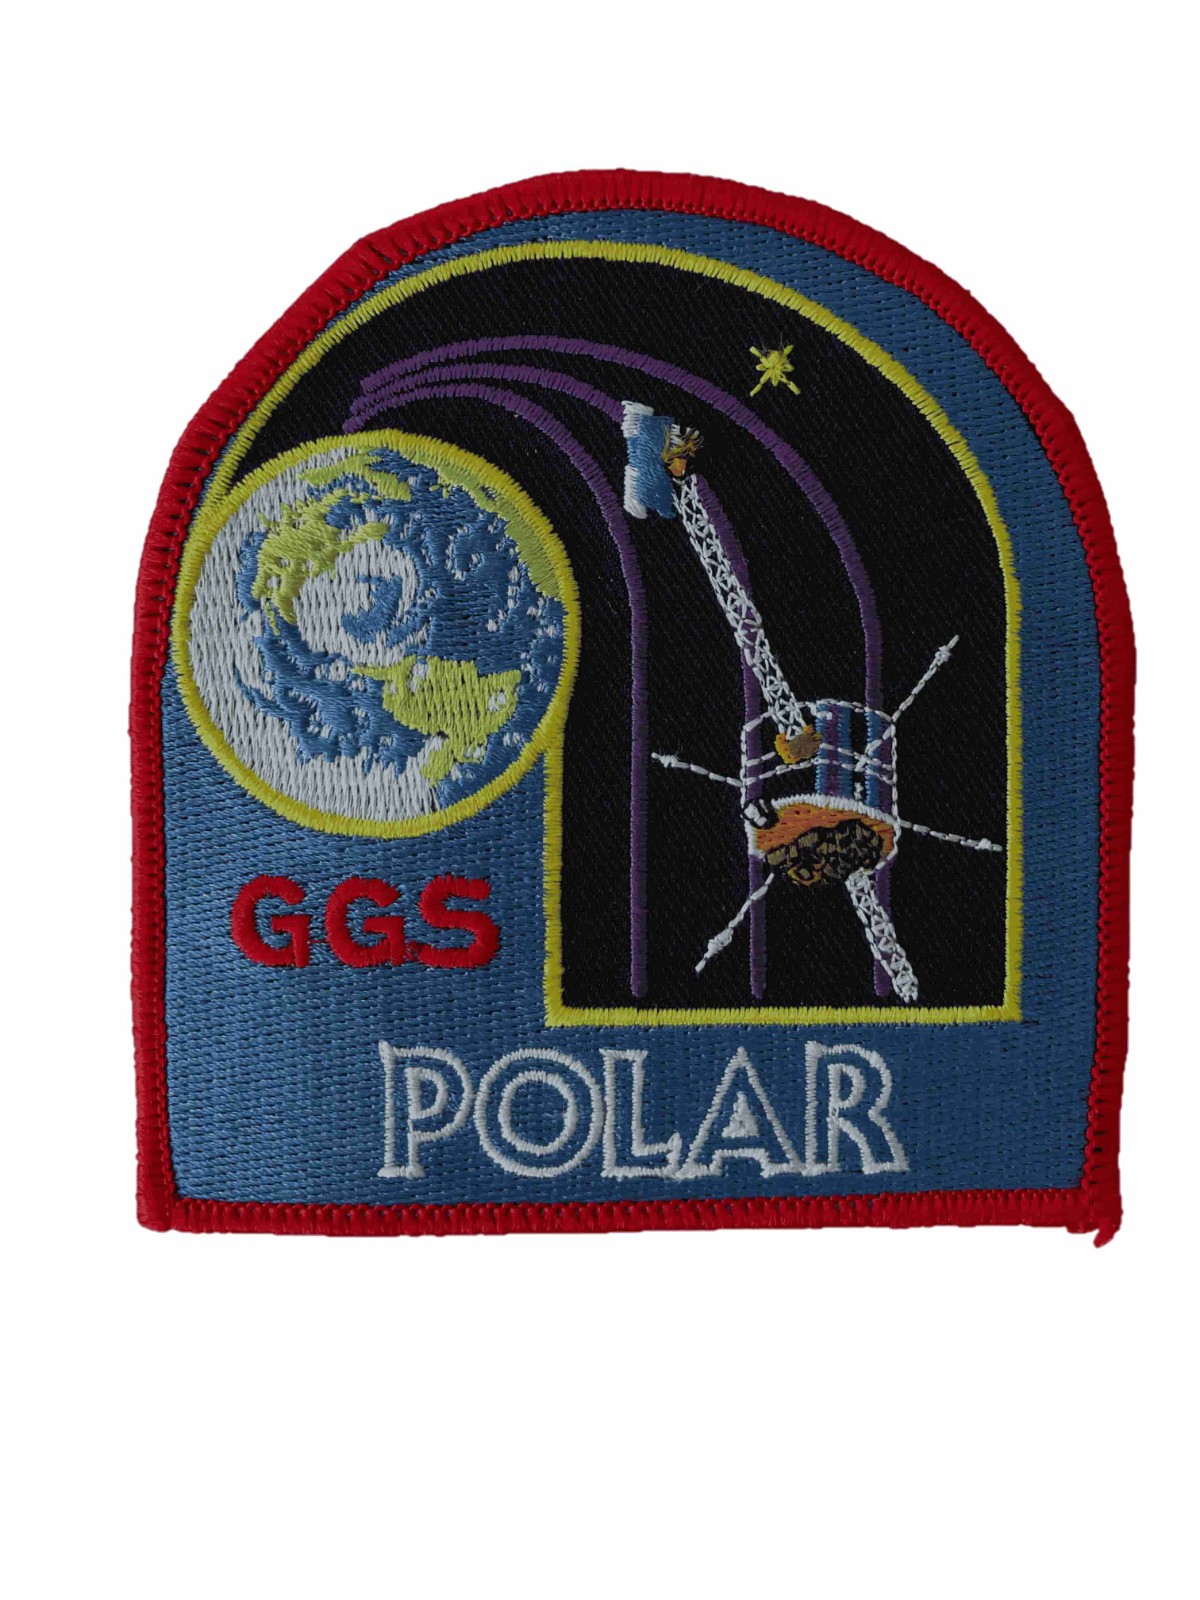 High Quality Iron-On Patches